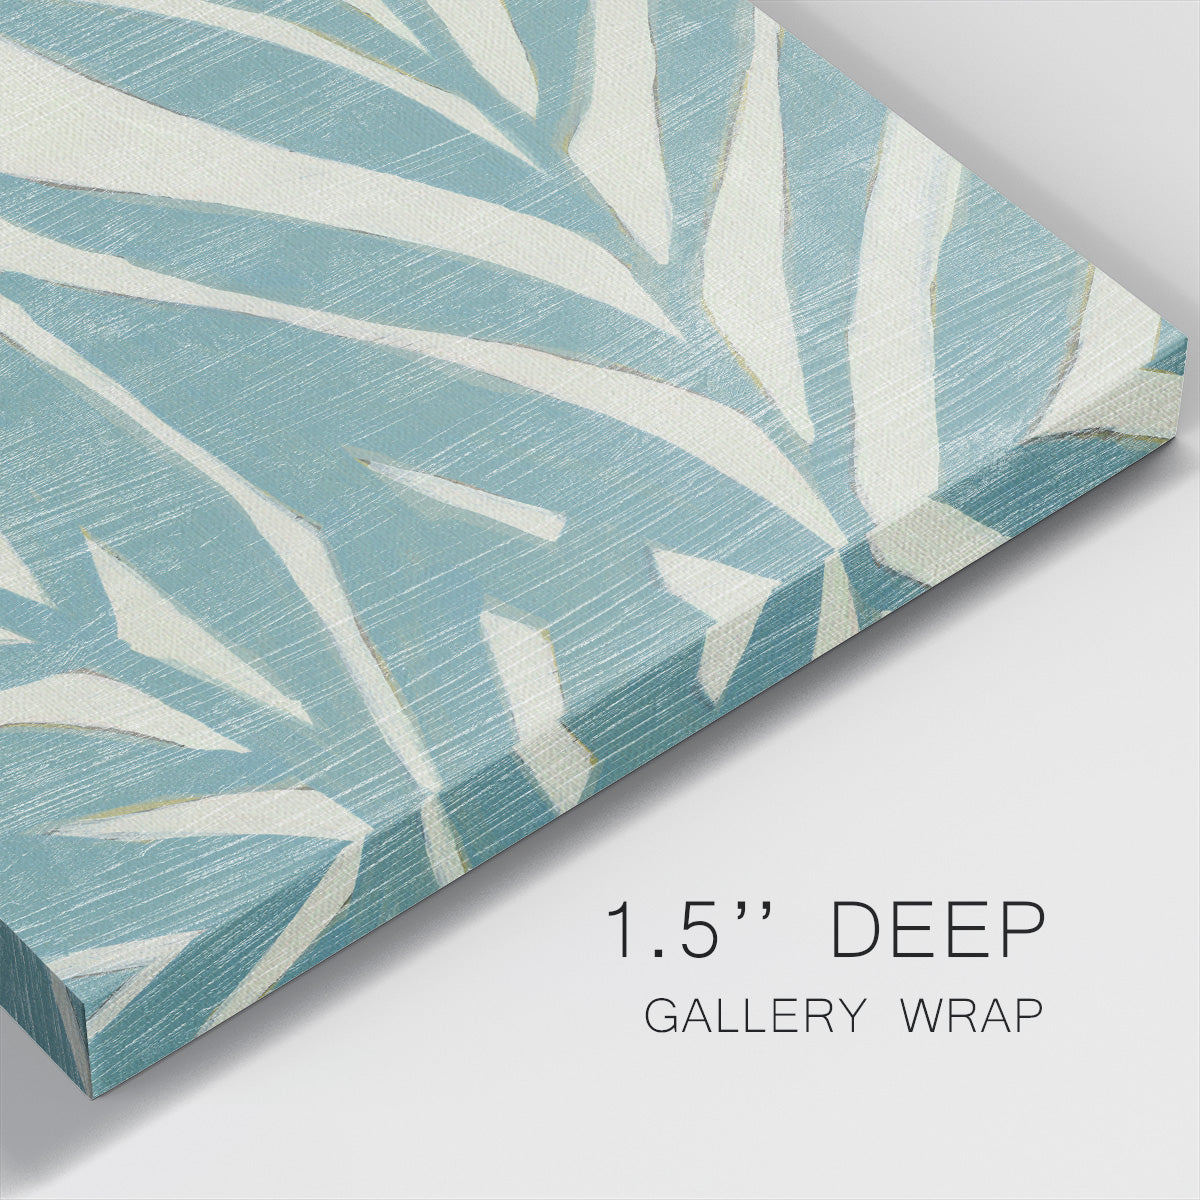 Spa Palms VII-Premium Gallery Wrapped Canvas - Ready to Hang